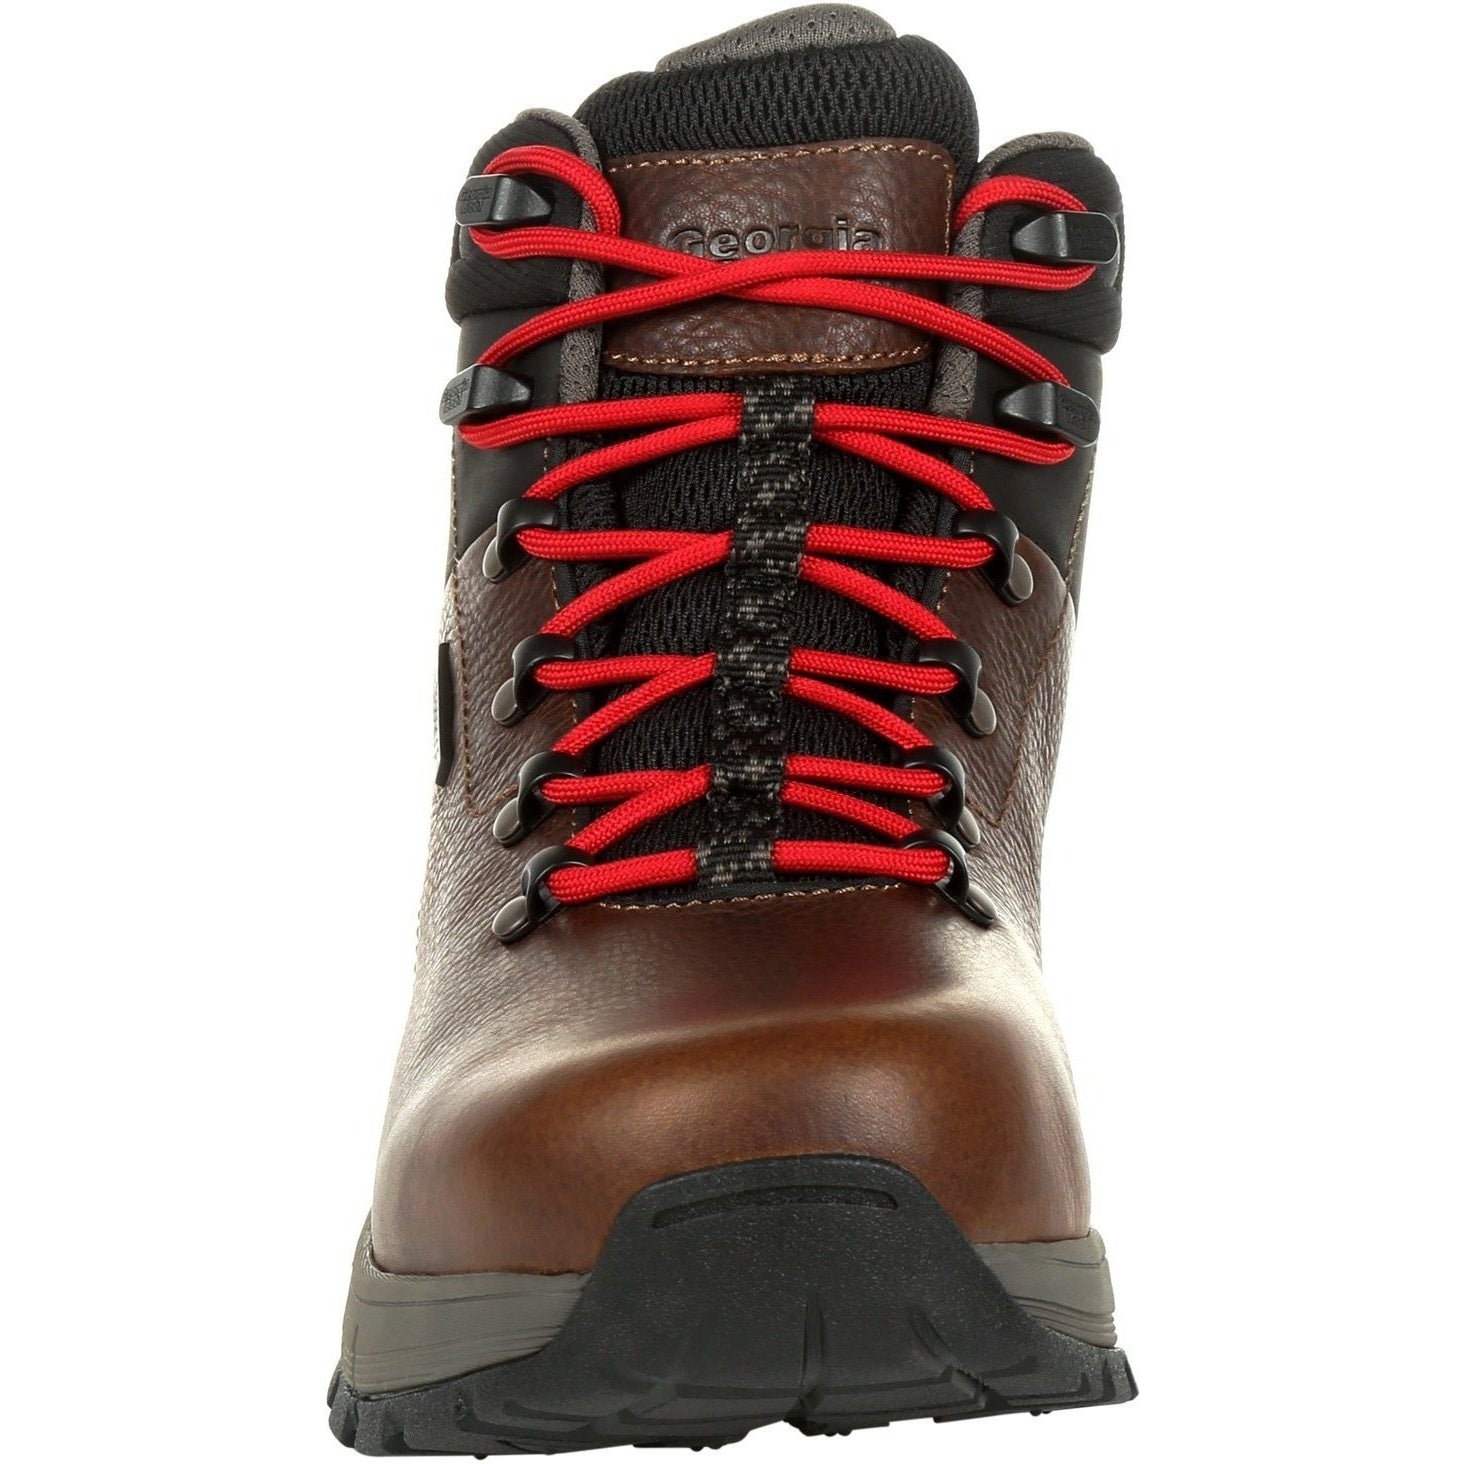 Georgia Men's Eagle Trail 6" Alloy Toe WP Hiker Work Boot - Brown - GB00397  - Overlook Boots